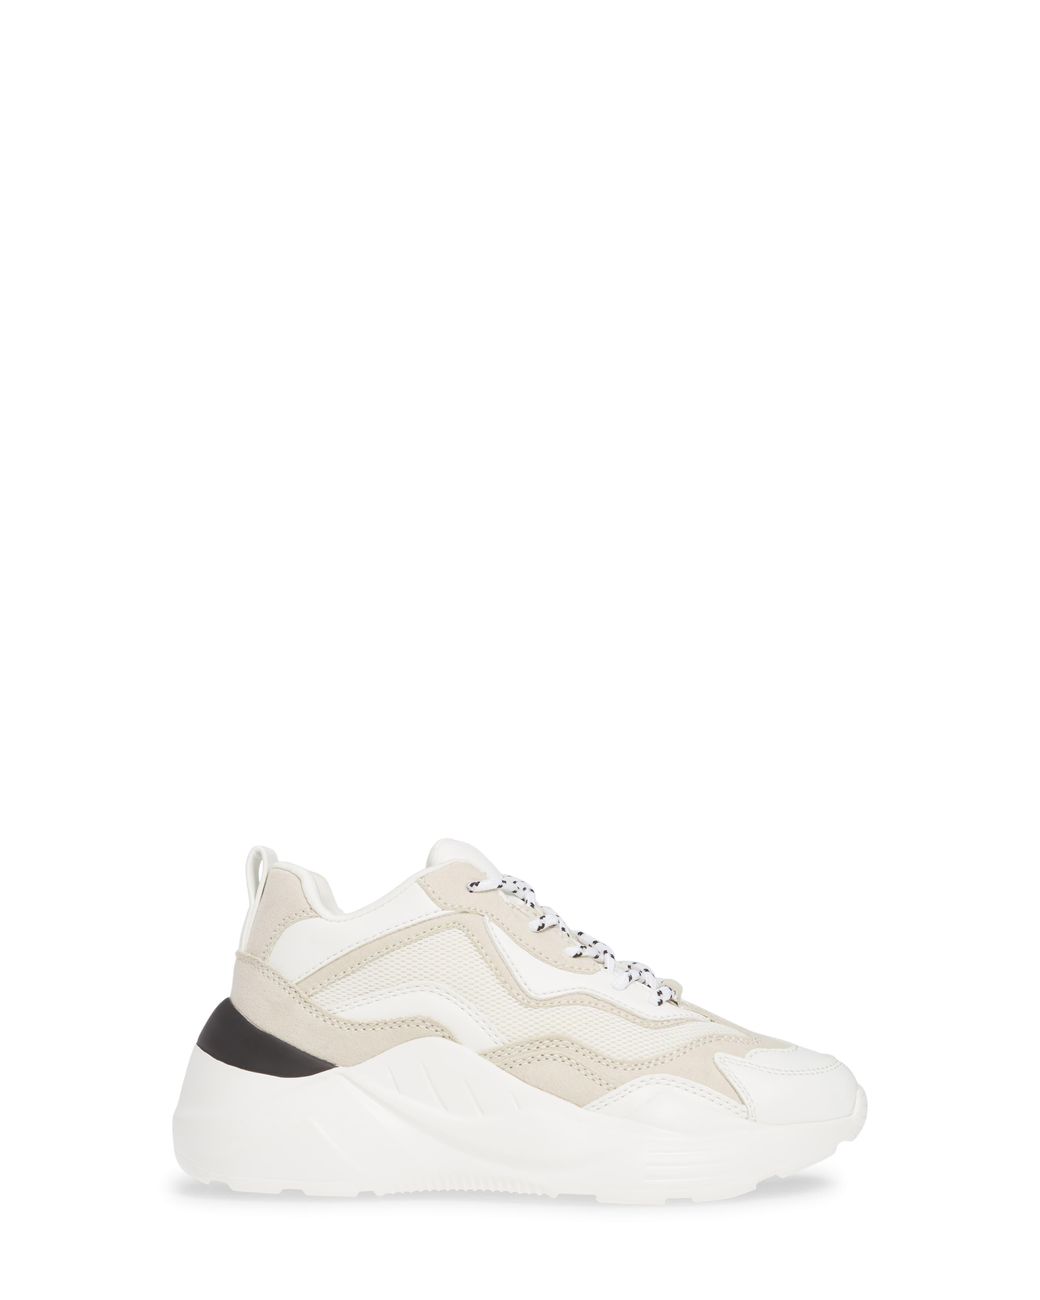 TOPSHOP Cancun Chunky Sneakers in Cream (White) | Lyst